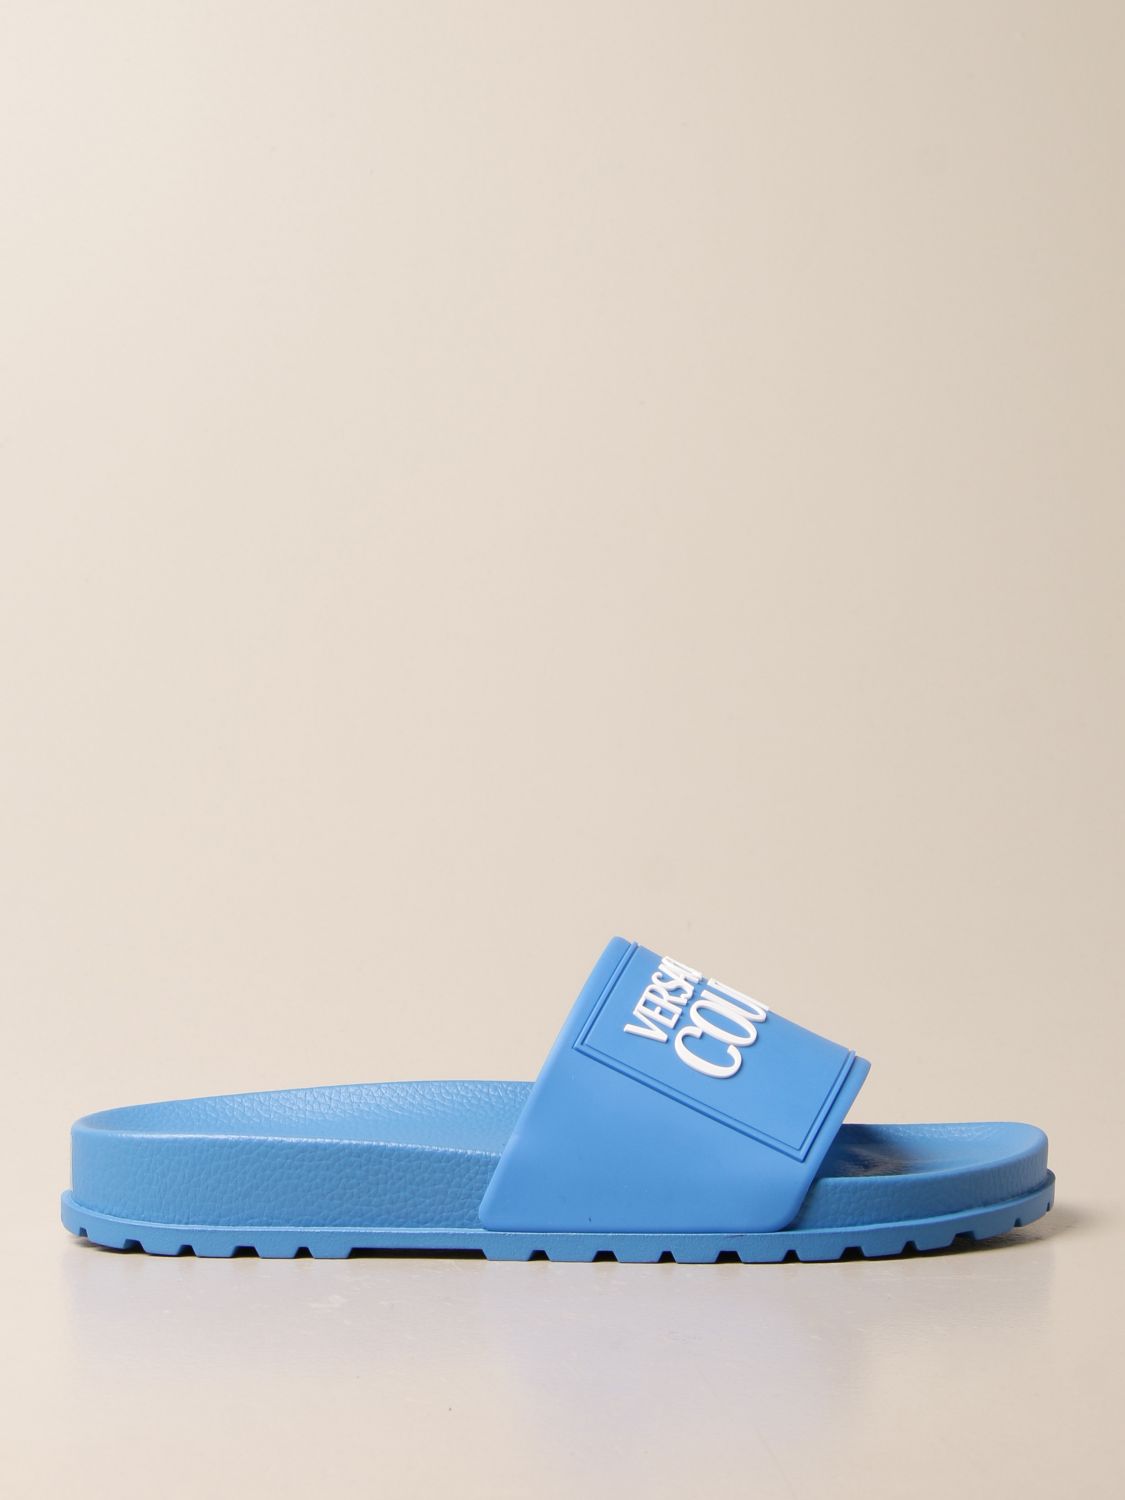 VERSACE JEANS COUTURE: rubber sandal with logo - Blue | Sandals Versace